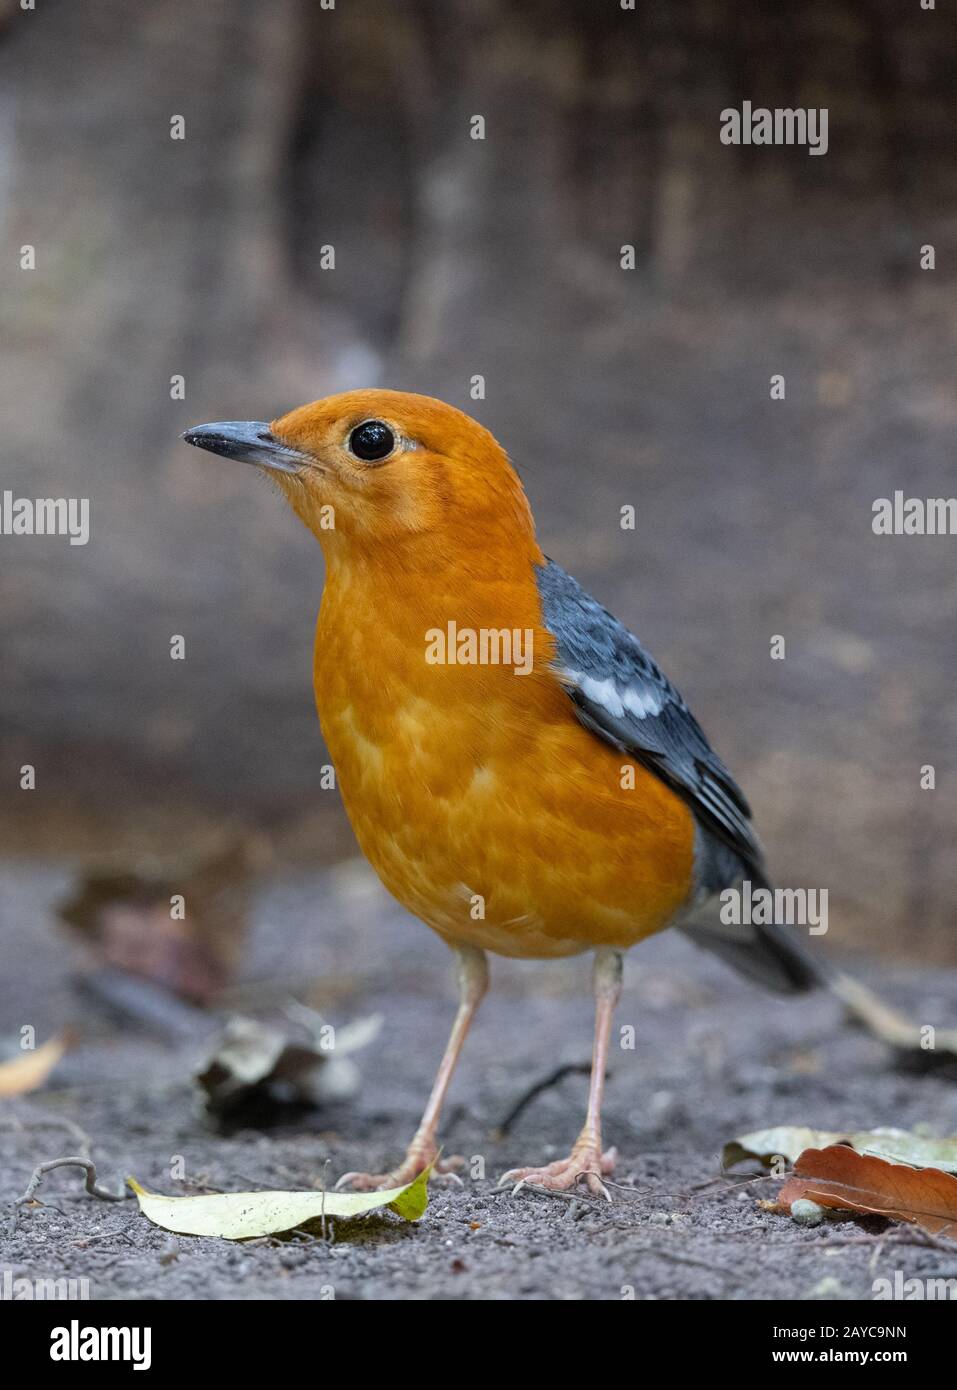 The orange-headed thrush (Geokichla citrina) is a bird in the thrush family. It is common in well-wooded areas of  Southeast Asia. Stock Photo